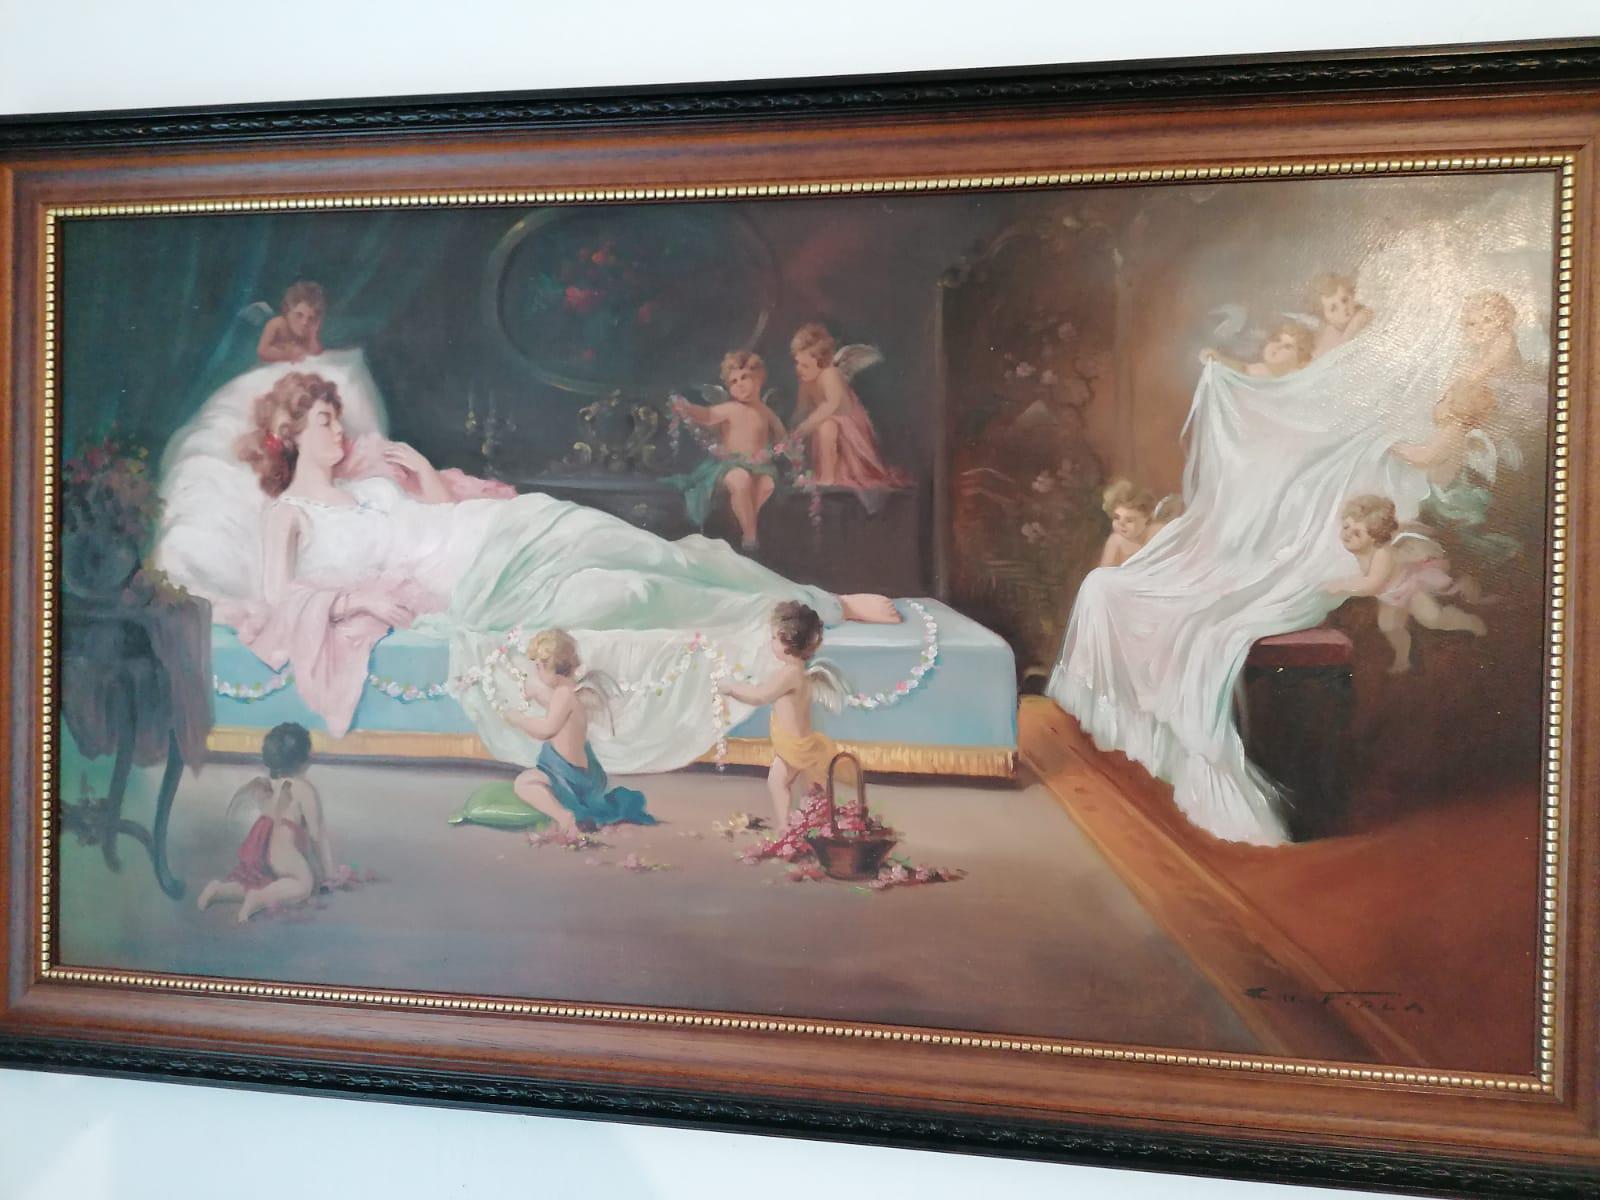 Oil painting by Emil Fiala (signed Em. Fiala (1882-1953))
Showing sleeping beauty with cherubs 
Good original condition.